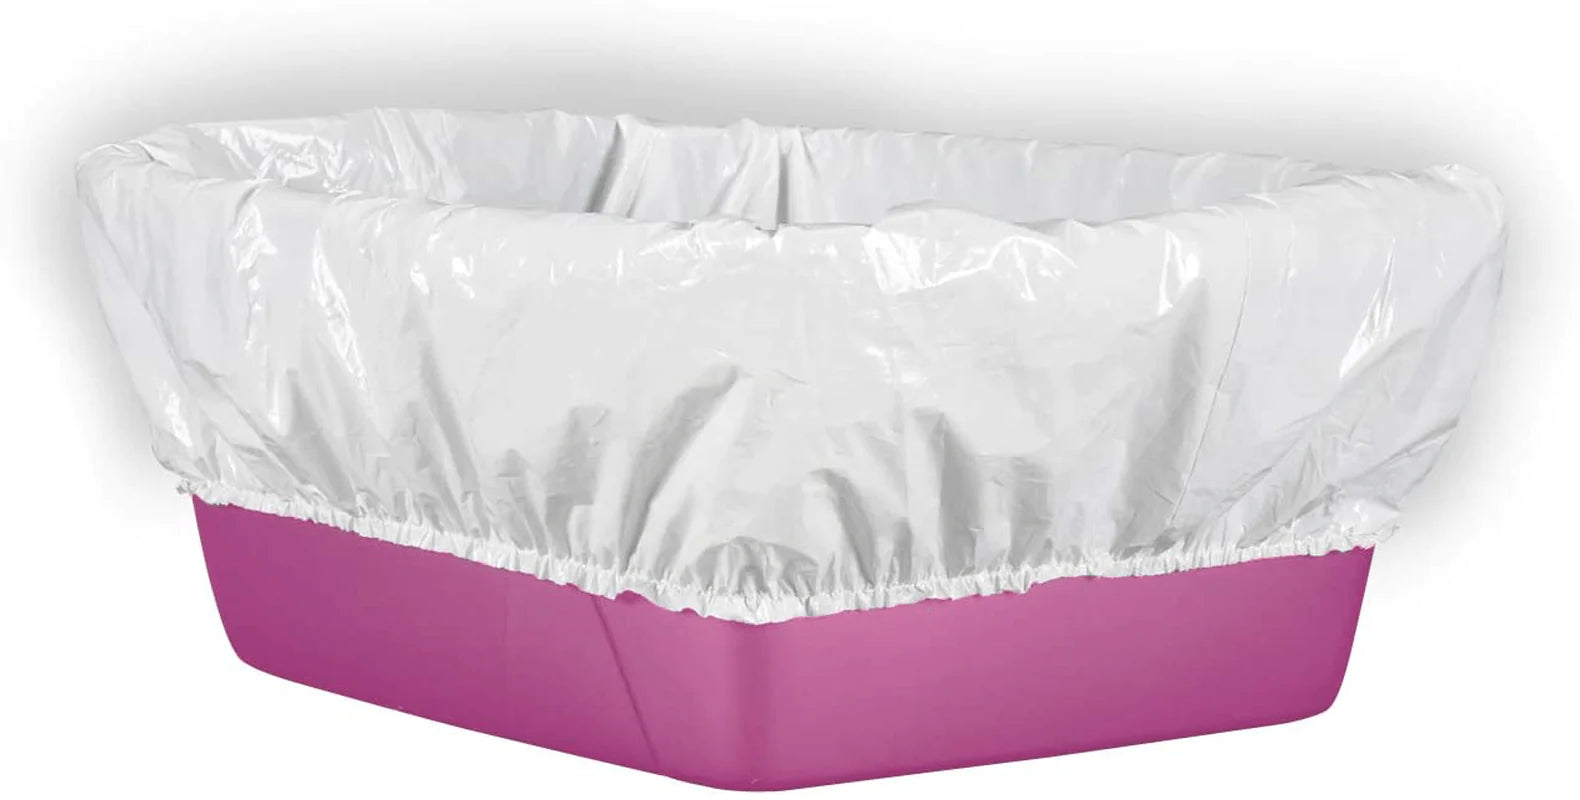 Alfapet Cat Box Litter Box Liners, Elastic Bags Liners- 10-Pack-For Large, X-Large, Giant, Extra-Giant Size Litterbox- with Sta-Put Technology for Firm, Easy Fit- Quick + Clever Waste Cleaners, Pack of 2 Animals & Pet Supplies > Pet Supplies > Cat Supplies > Cat Litter Box Liners Alfapet   